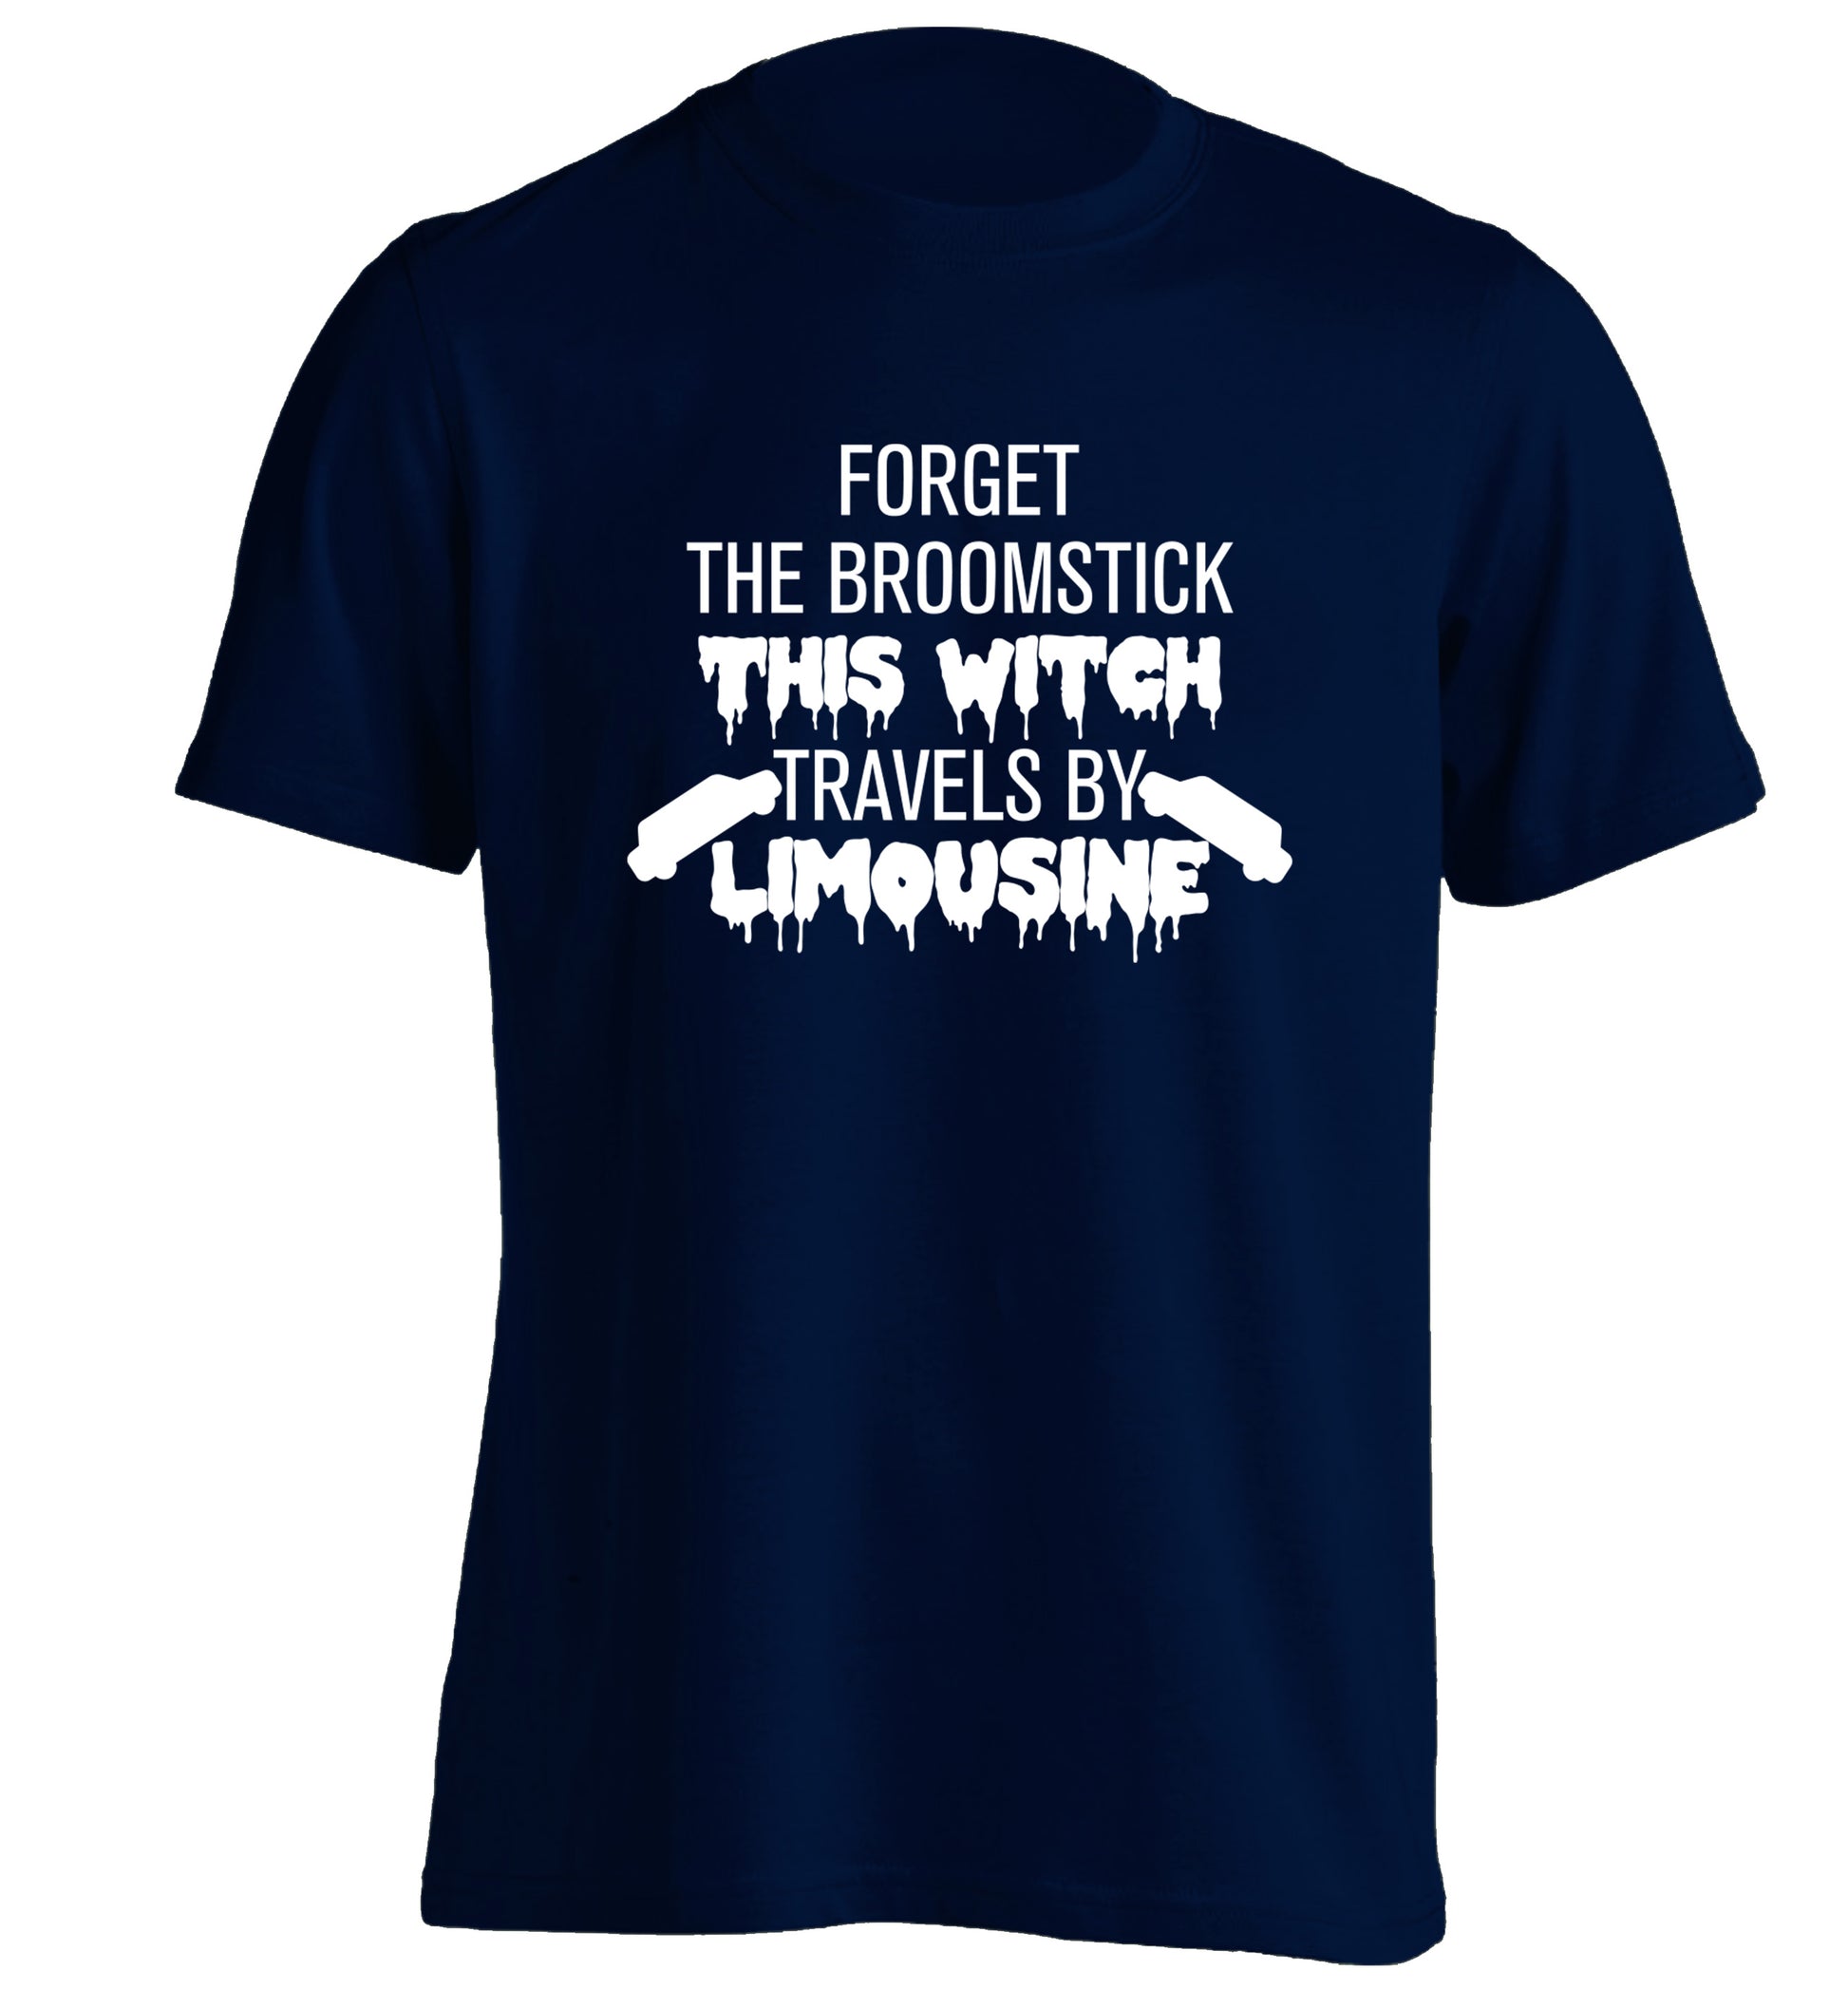 Forget the broomstick this witch travels by limousine adults unisexnavy Tshirt 2XL